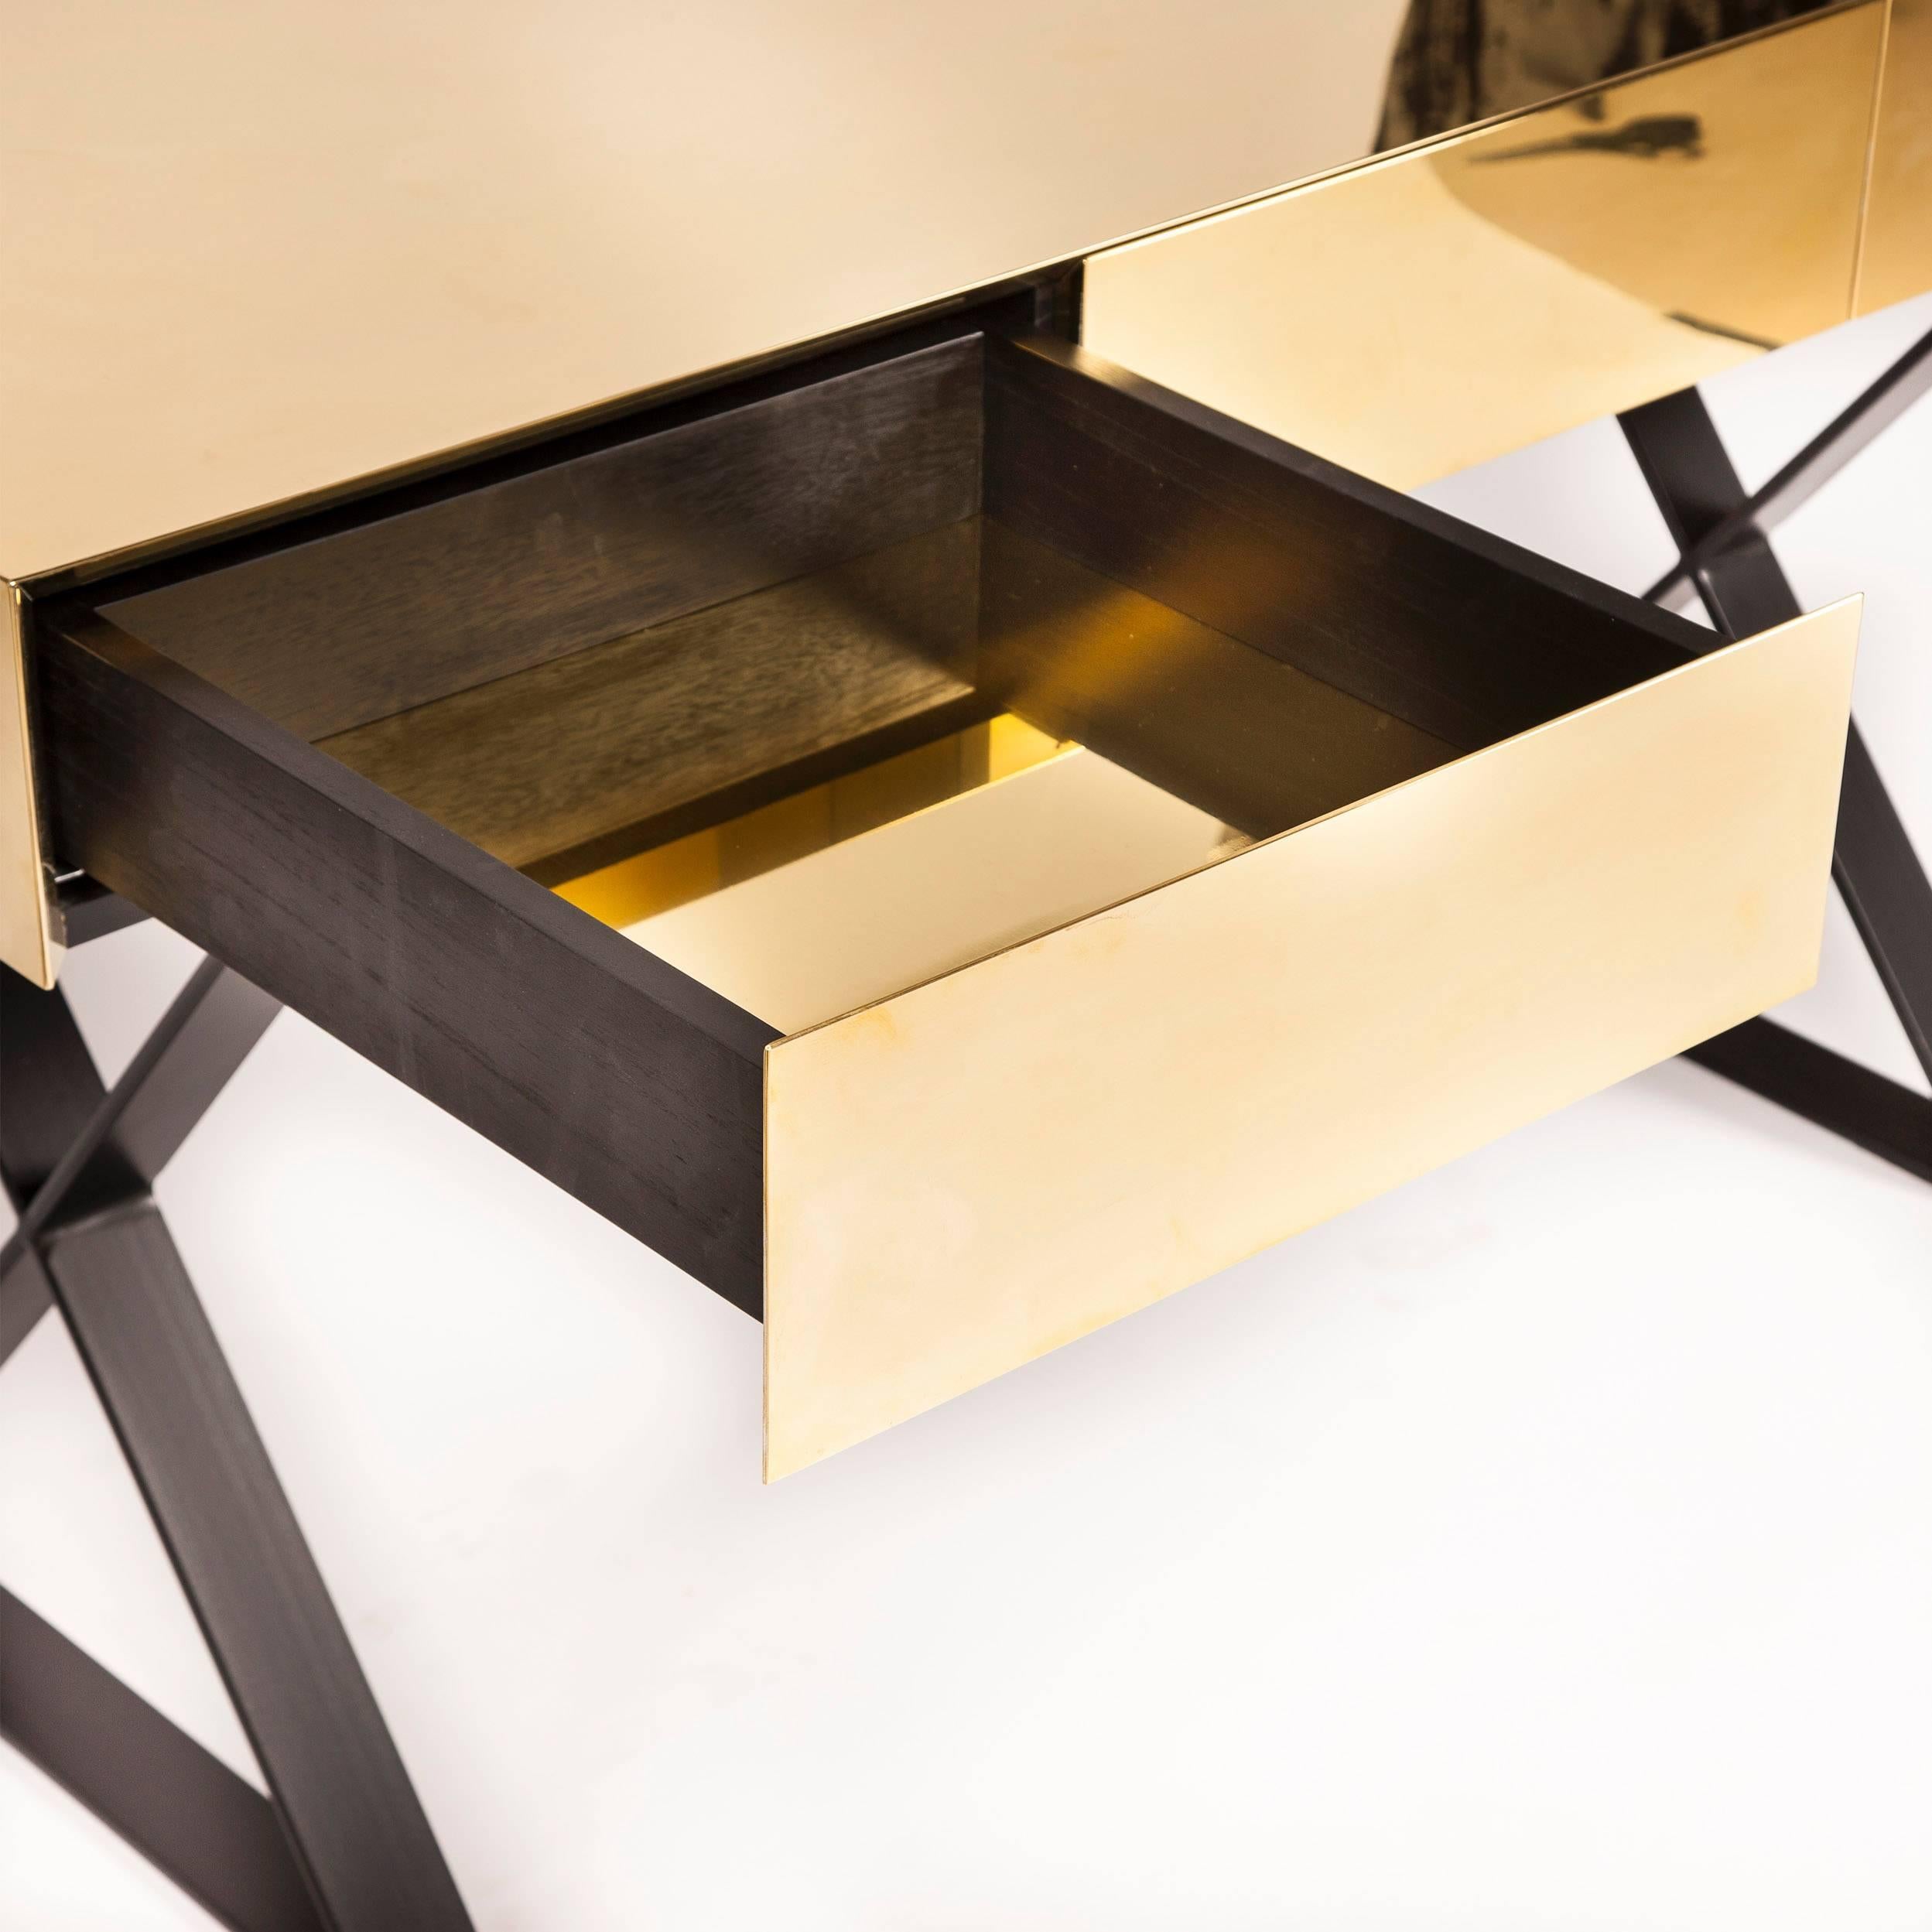 Seamless polished brass desk with brass lined pull-to-open drawers and matt black metal legs. Lacquered. Also available in antique brass or bronzed finish. Bespoke dimensions and finishes available on request.

W160 x D60 x H75 cm

Lead time: 8 - 10